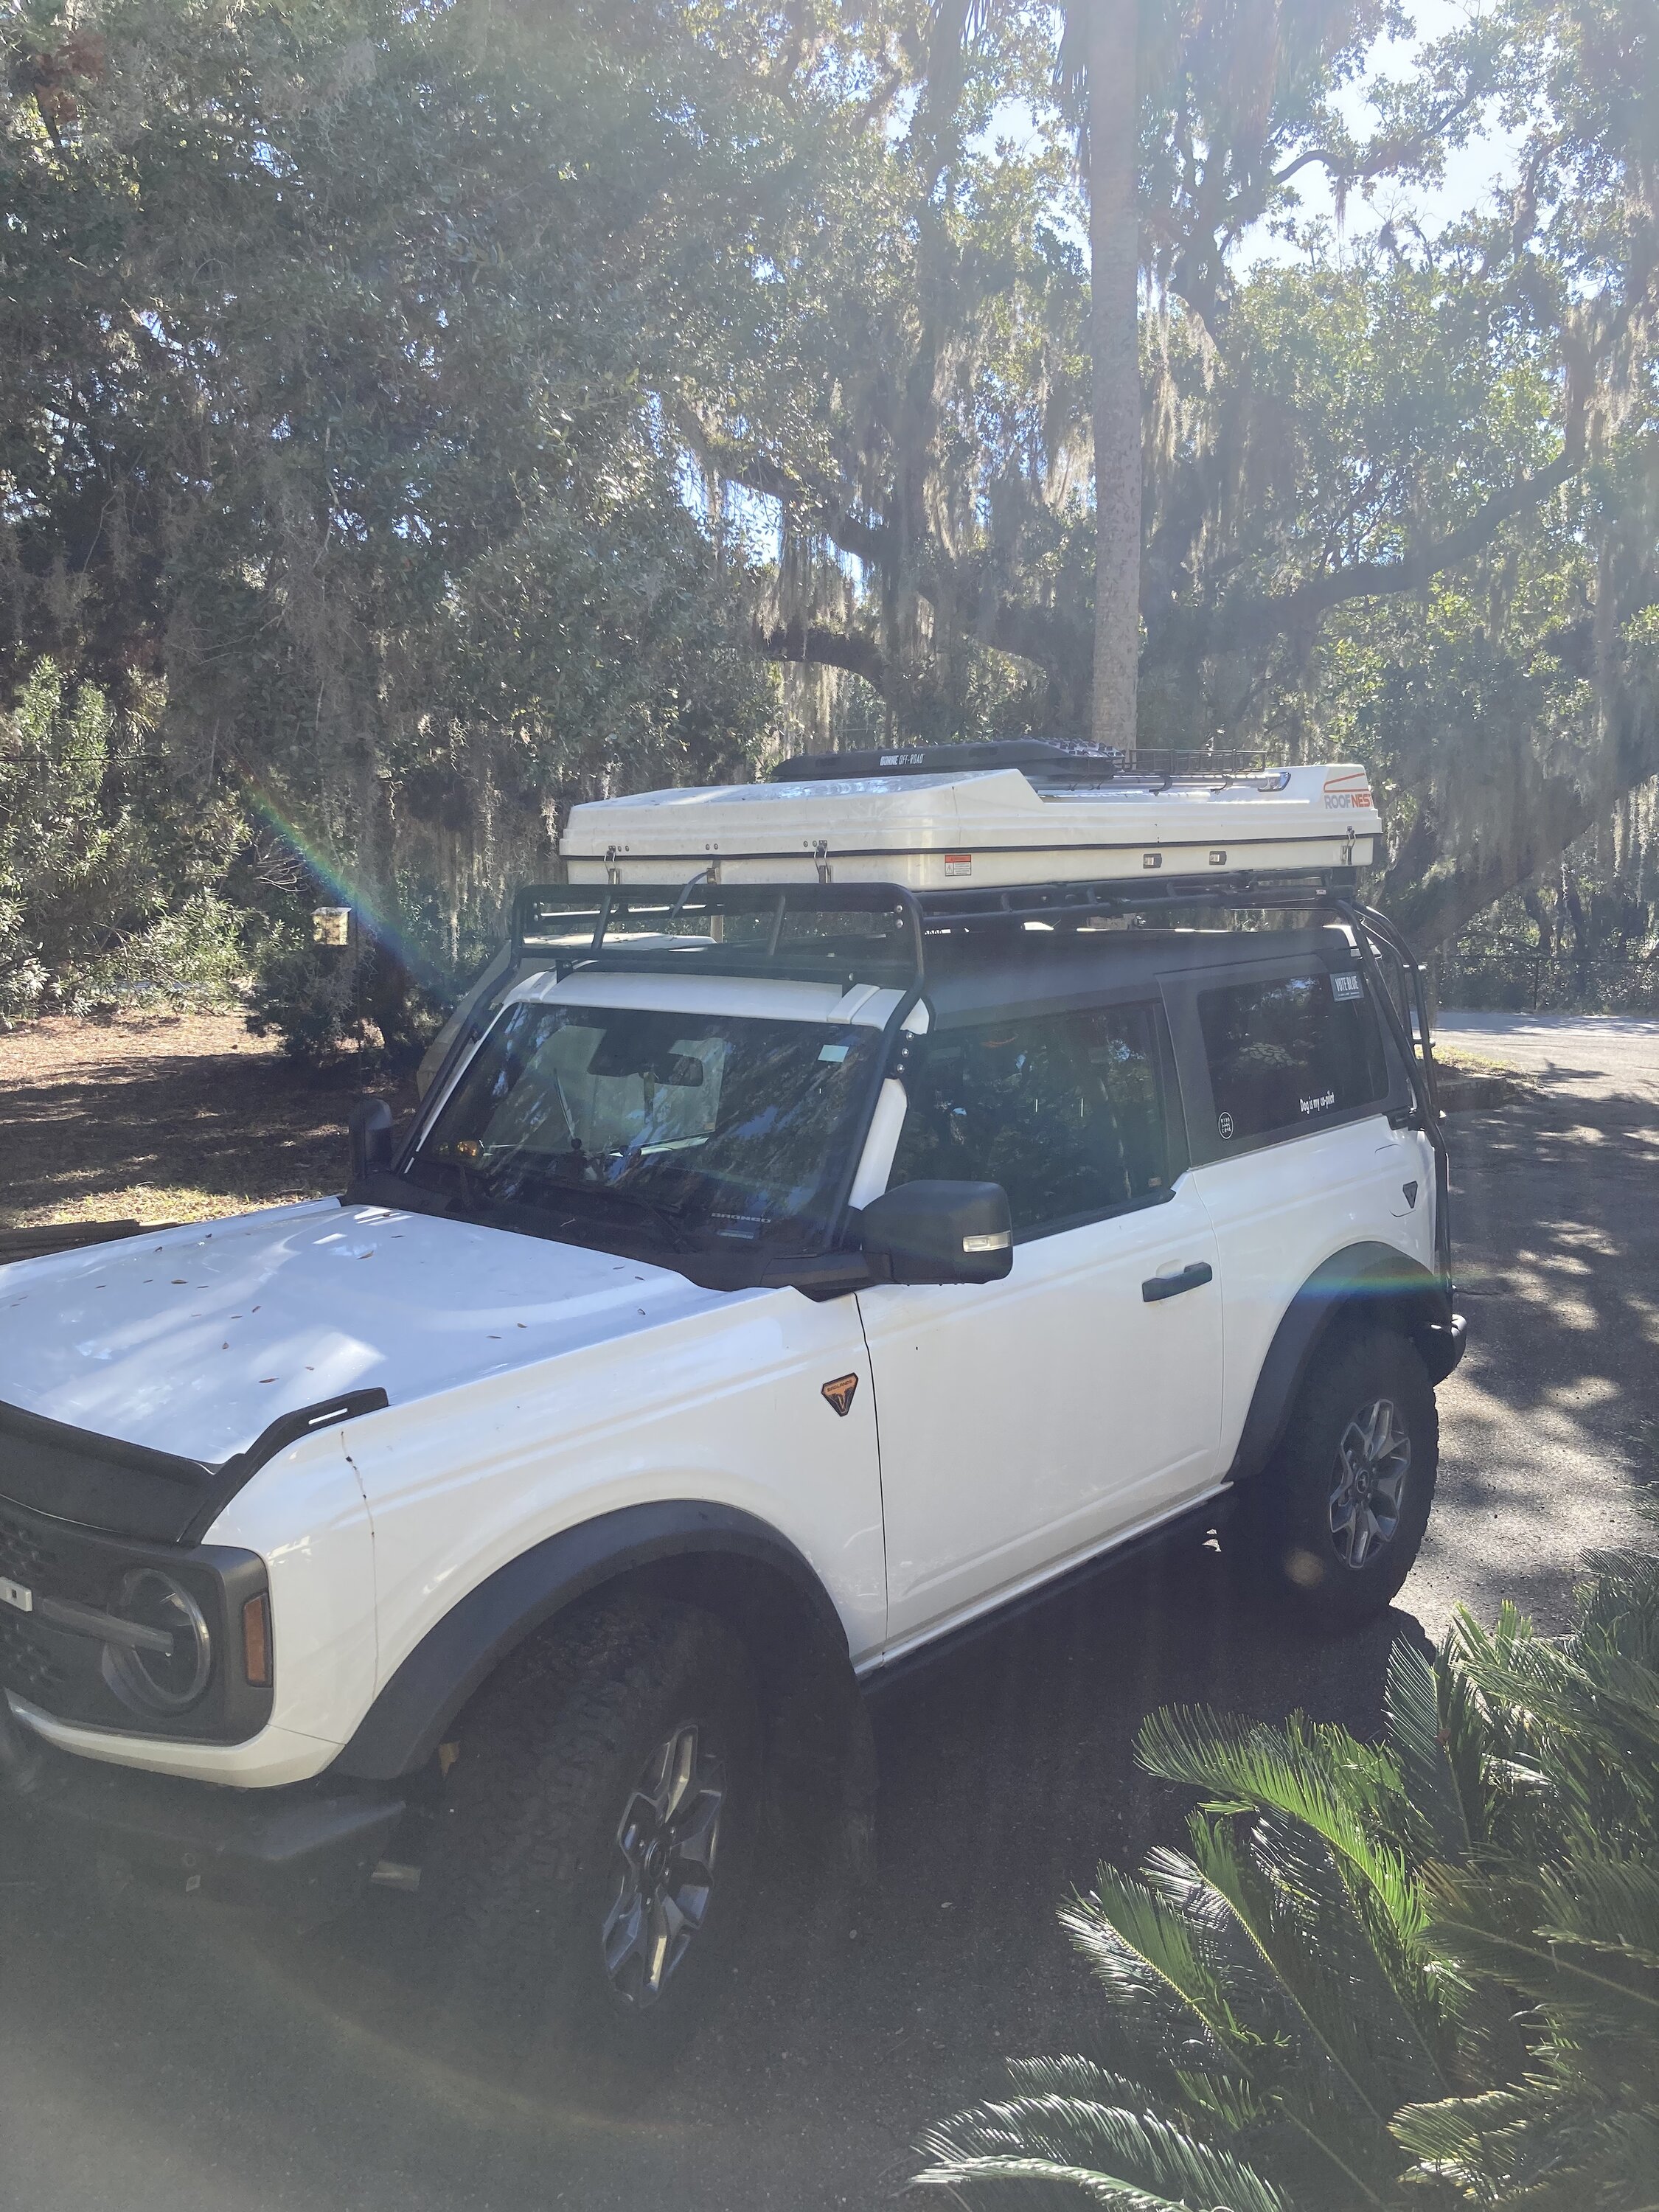 Ford Bronco GOBI Racks in the Wild - Post Your Photos 3386F897-0FCD-40BB-8734-F96920303635